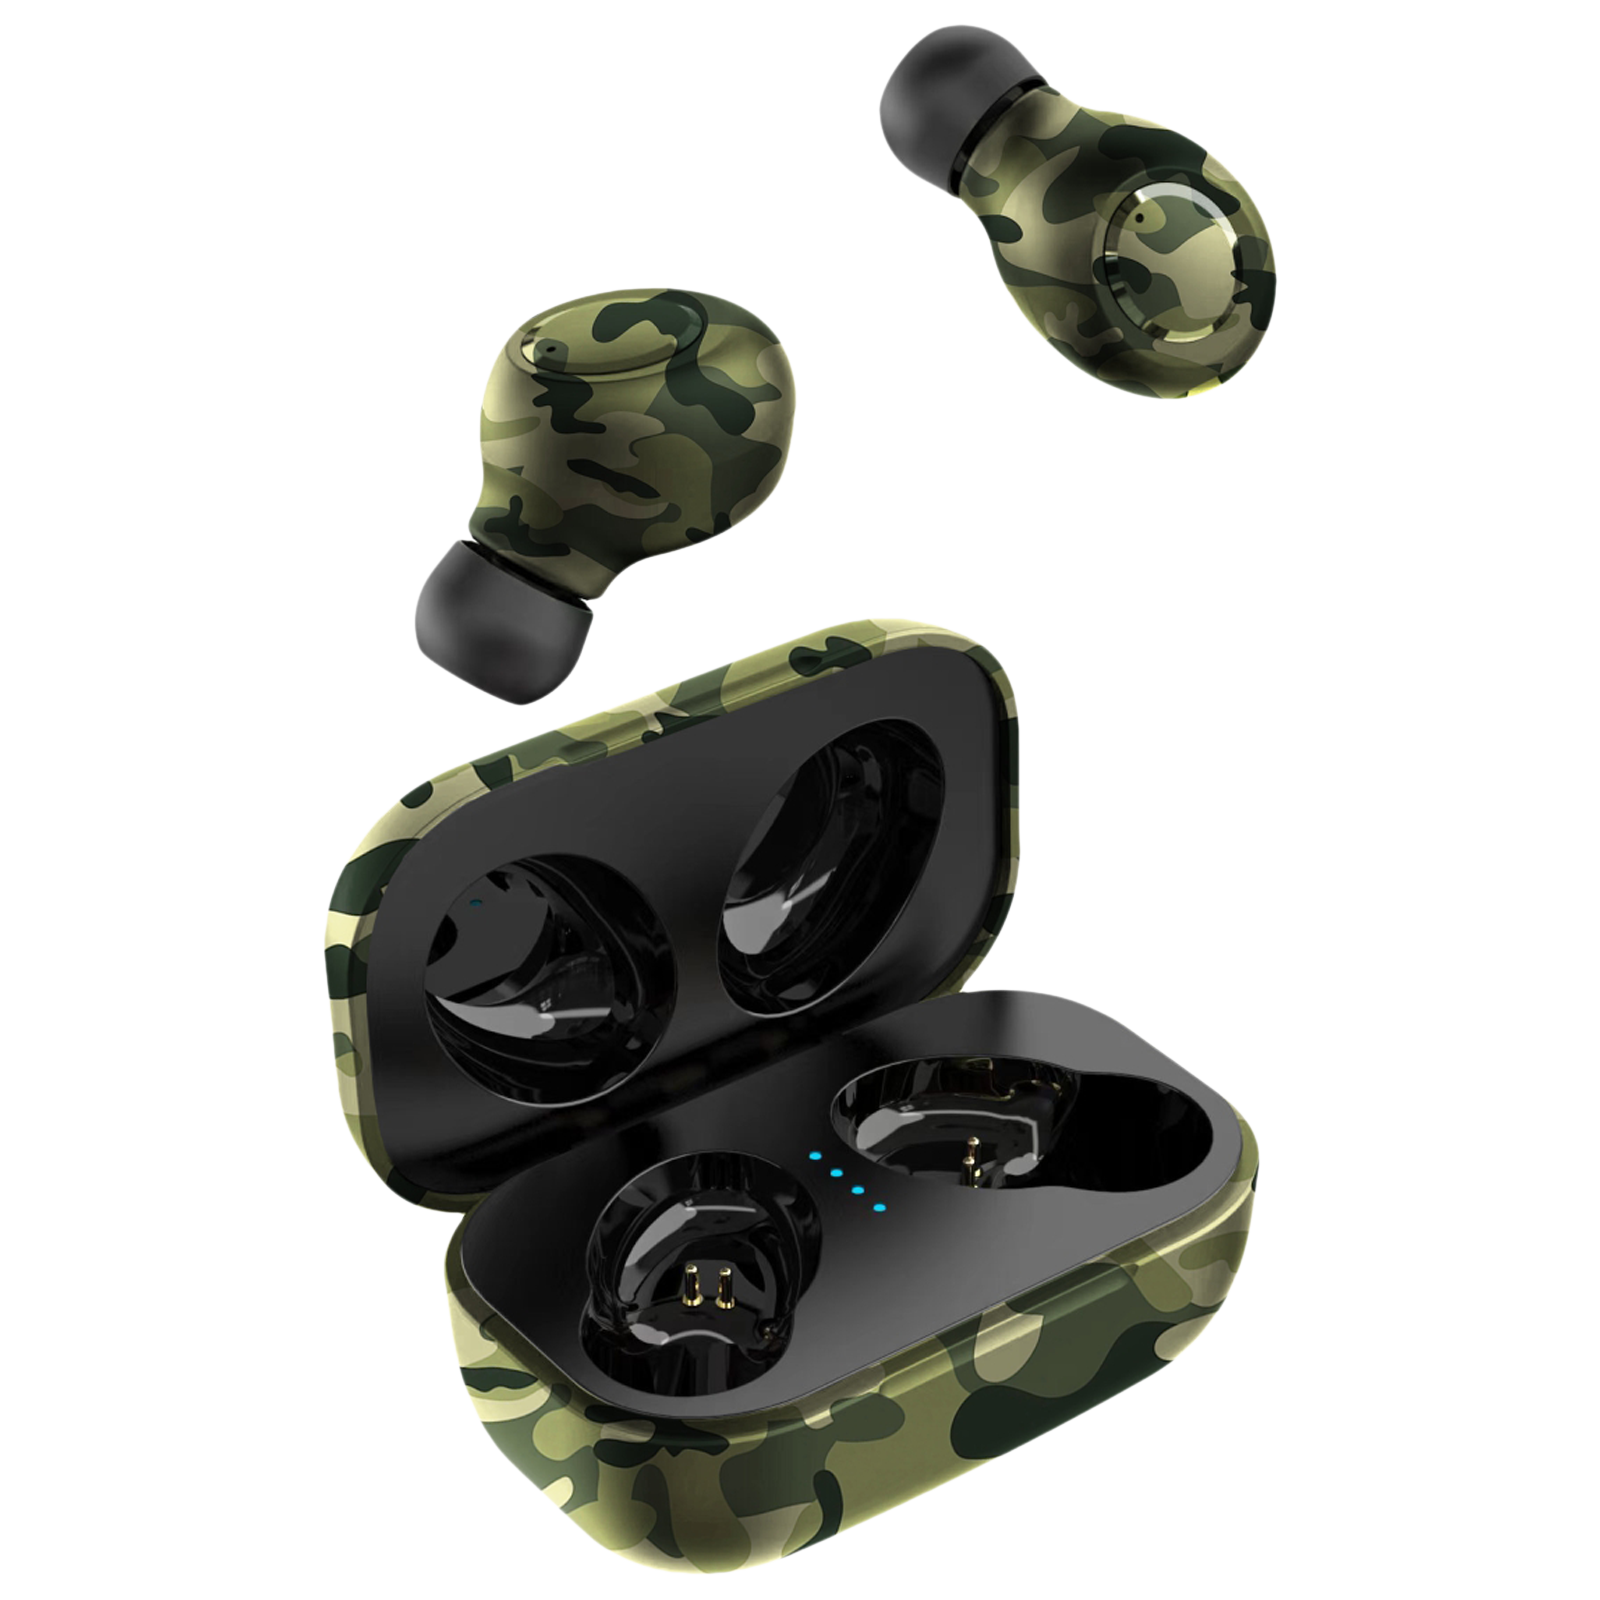 Candytech Camotwin TWS Earbuds (HiFi Stereo Sound, Camo)